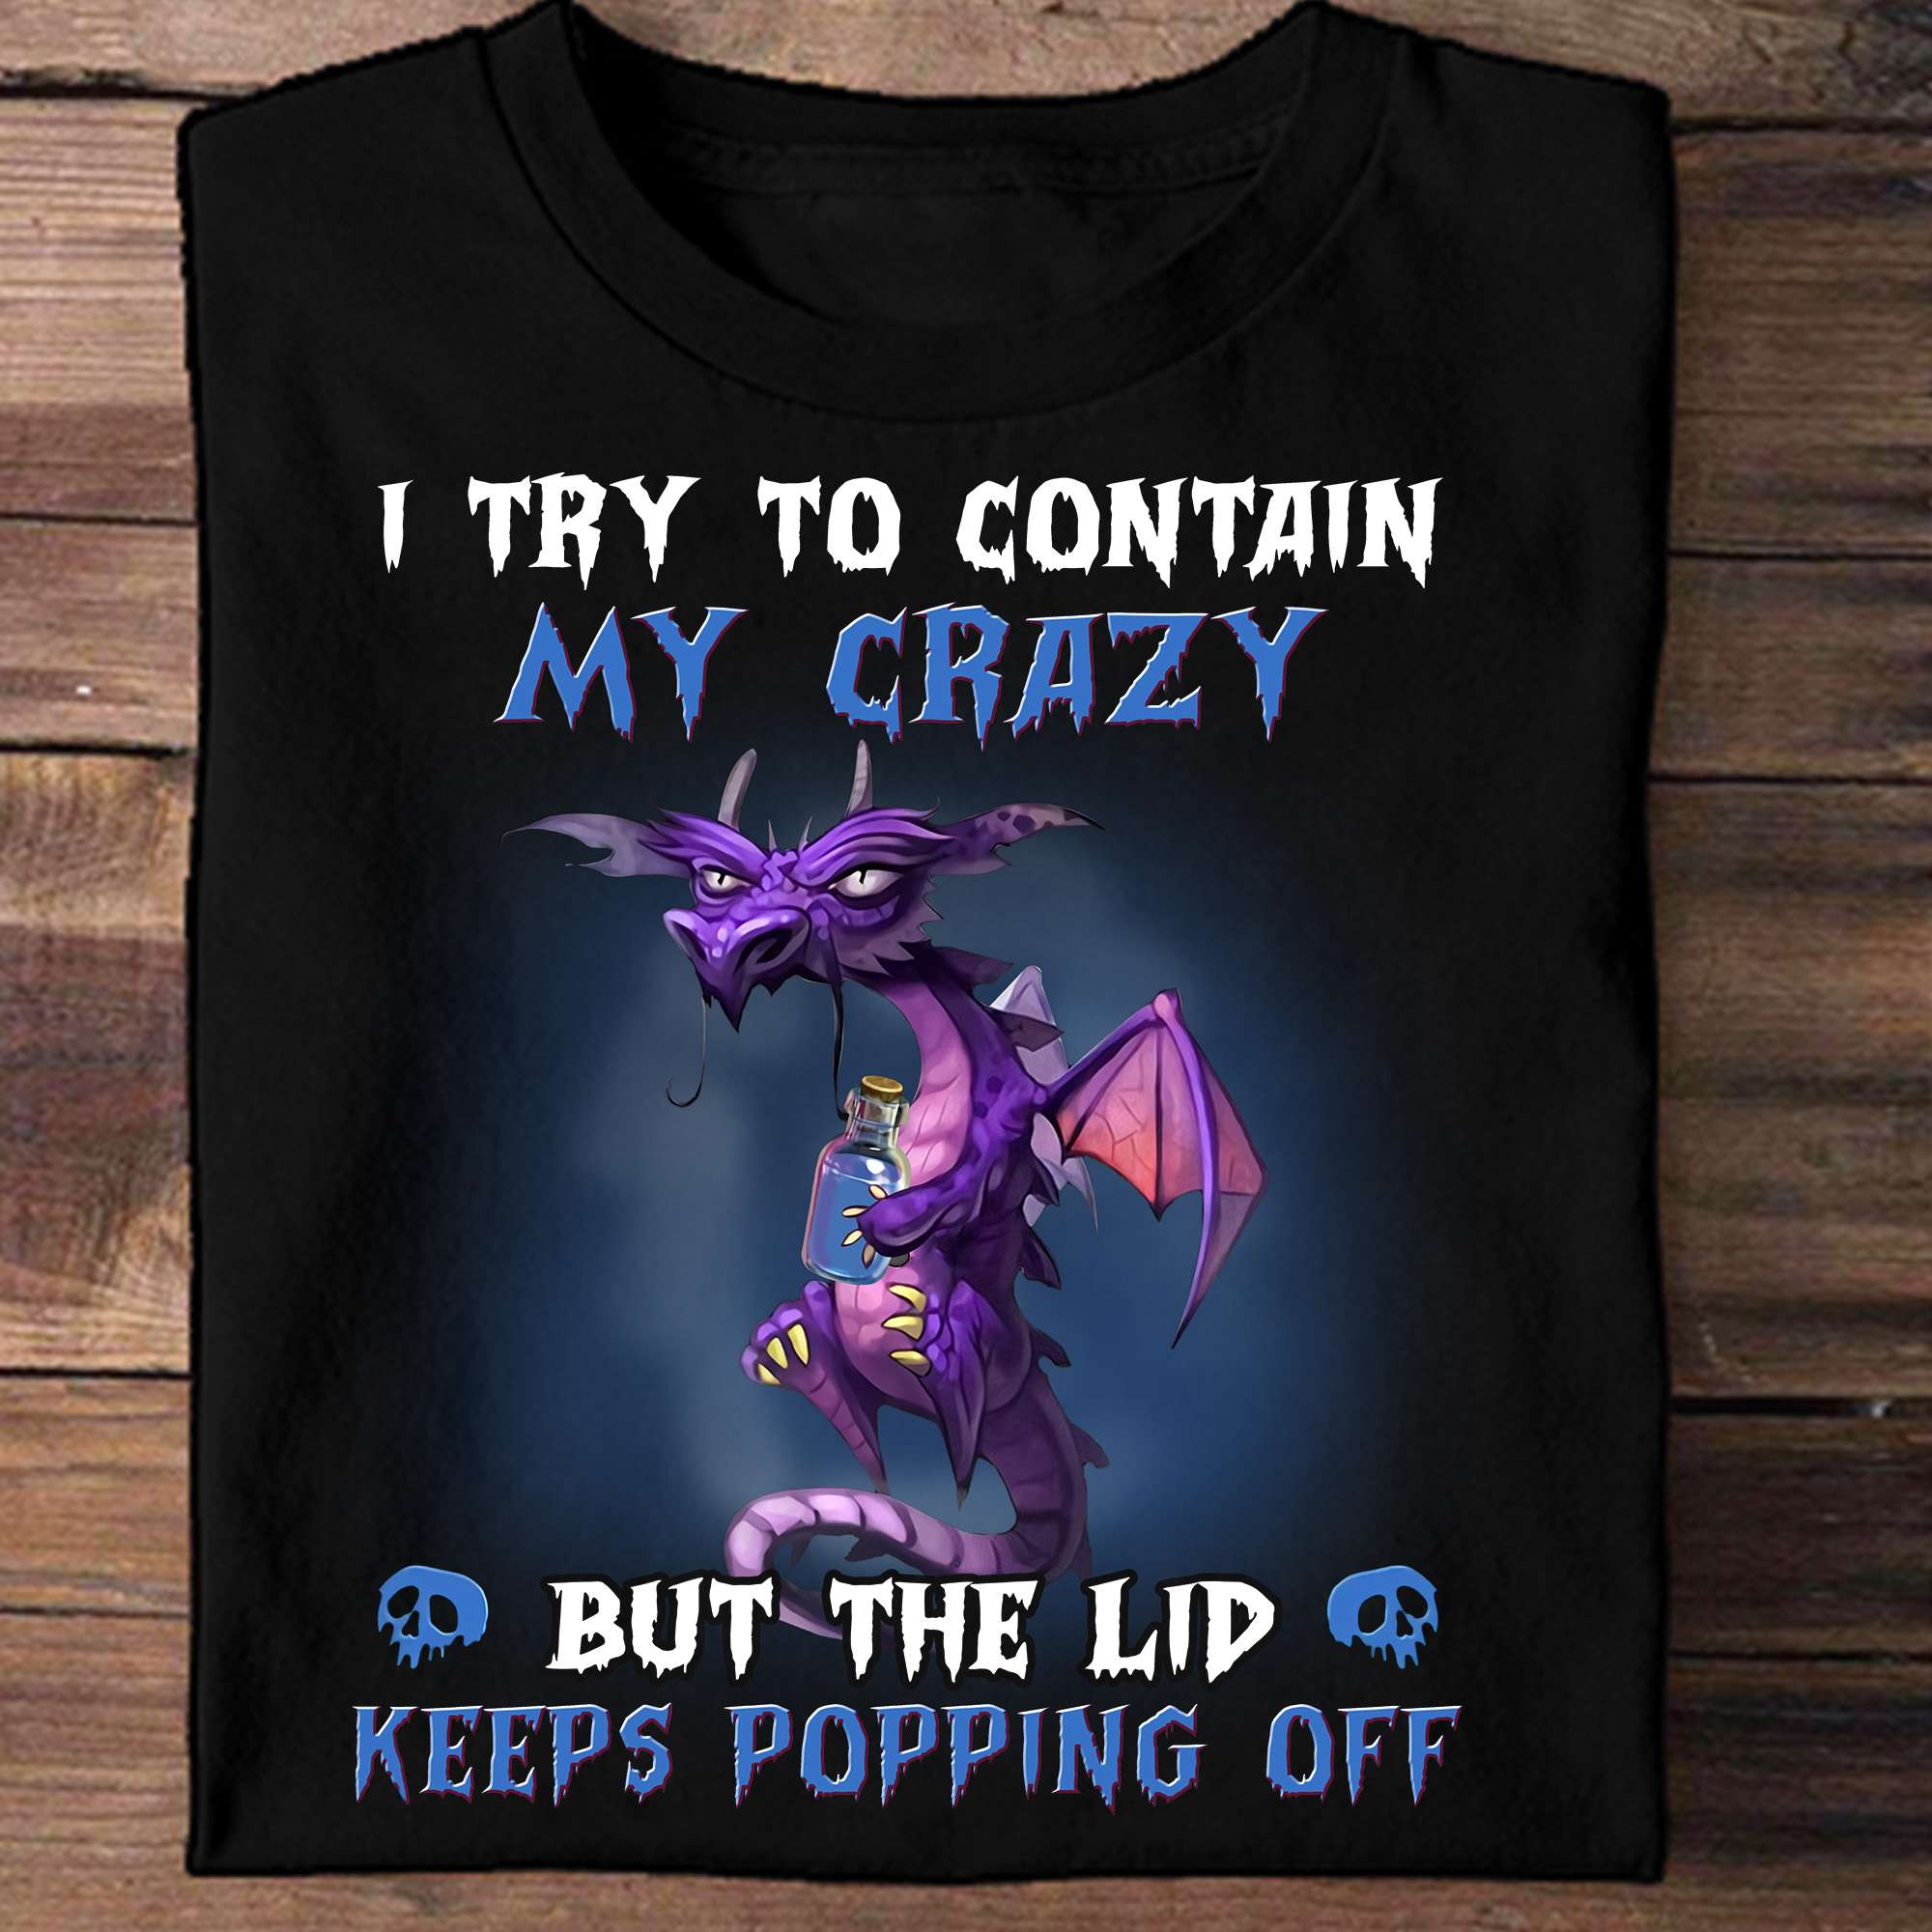 I try to contain my crazy but the lid keeps popping off - Crazy dragon